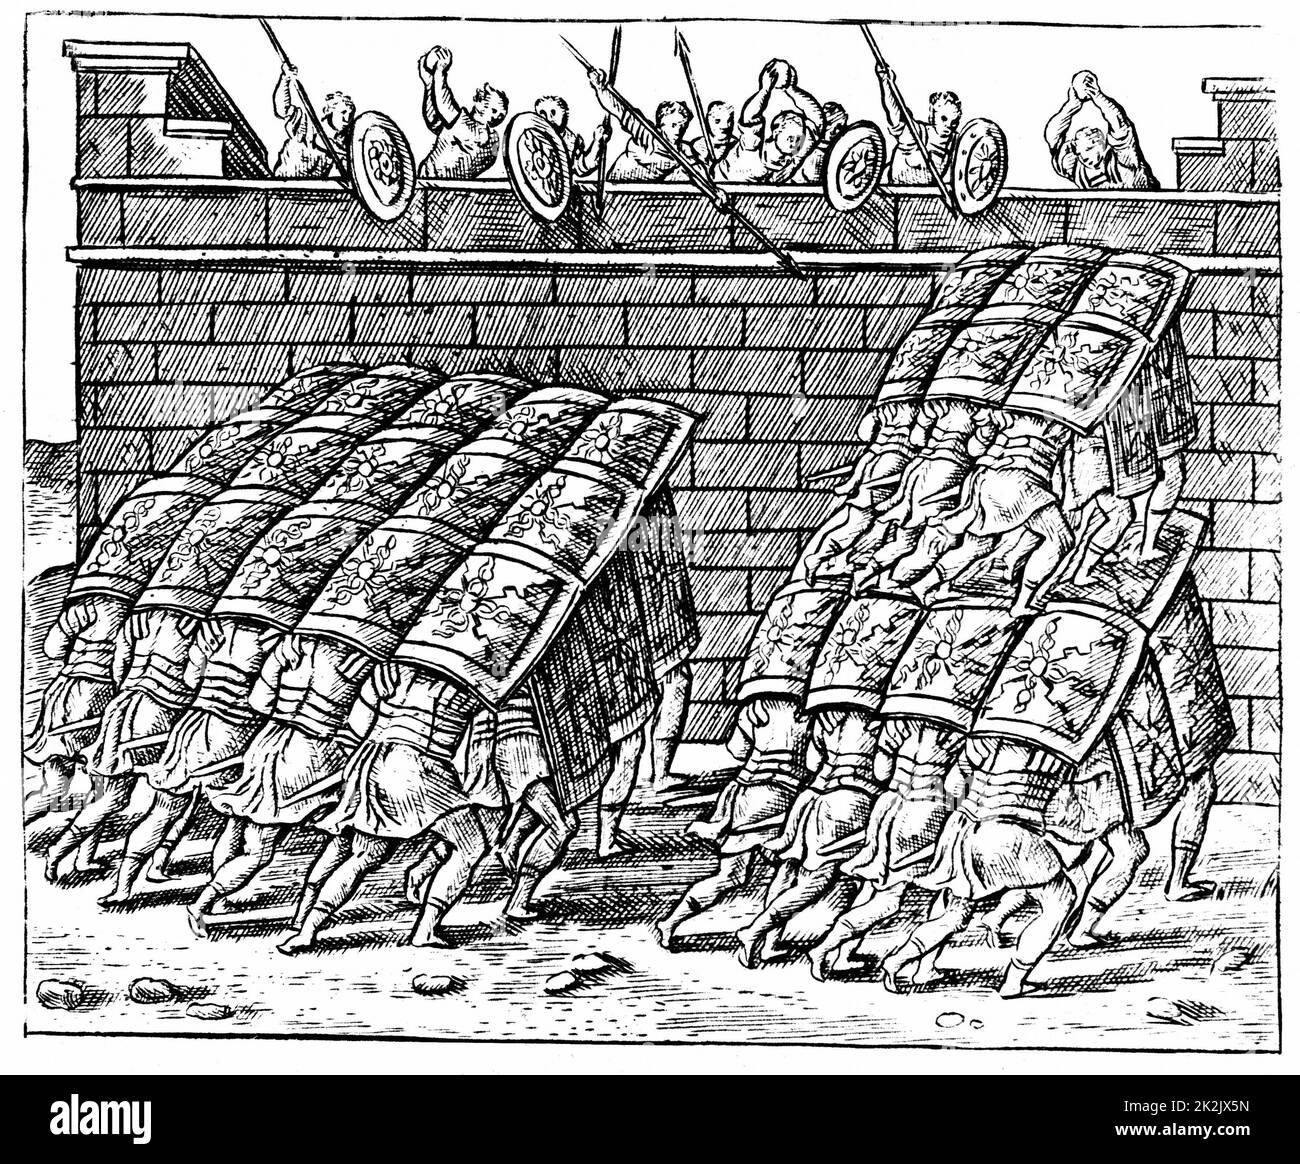 Roman soldiers forming a Tortoise with their shields and approaching the walls of a besieged fortress. Engraving from Justus Lipsius 'Poliorceticon' Antwerp 1605. Stock Photo